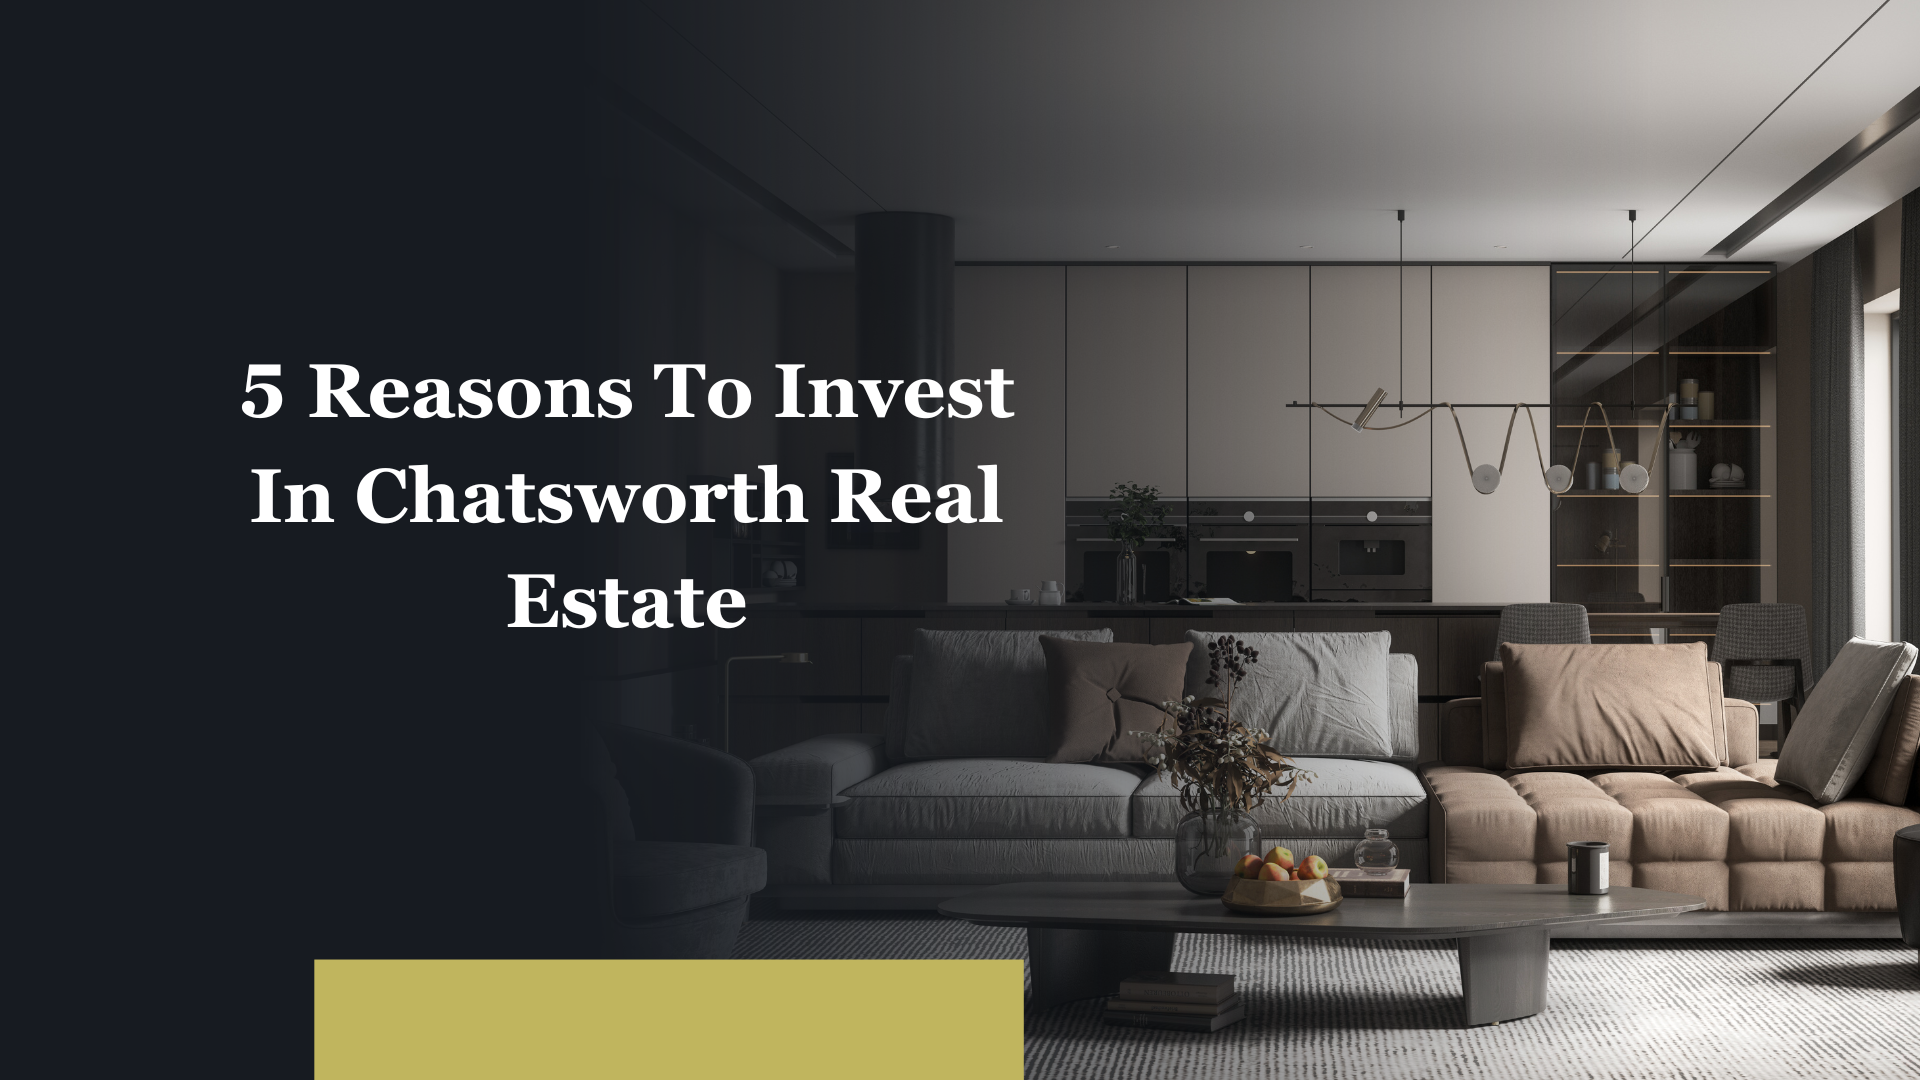 5 Reasons To Invest In Chatsworth Real Estate